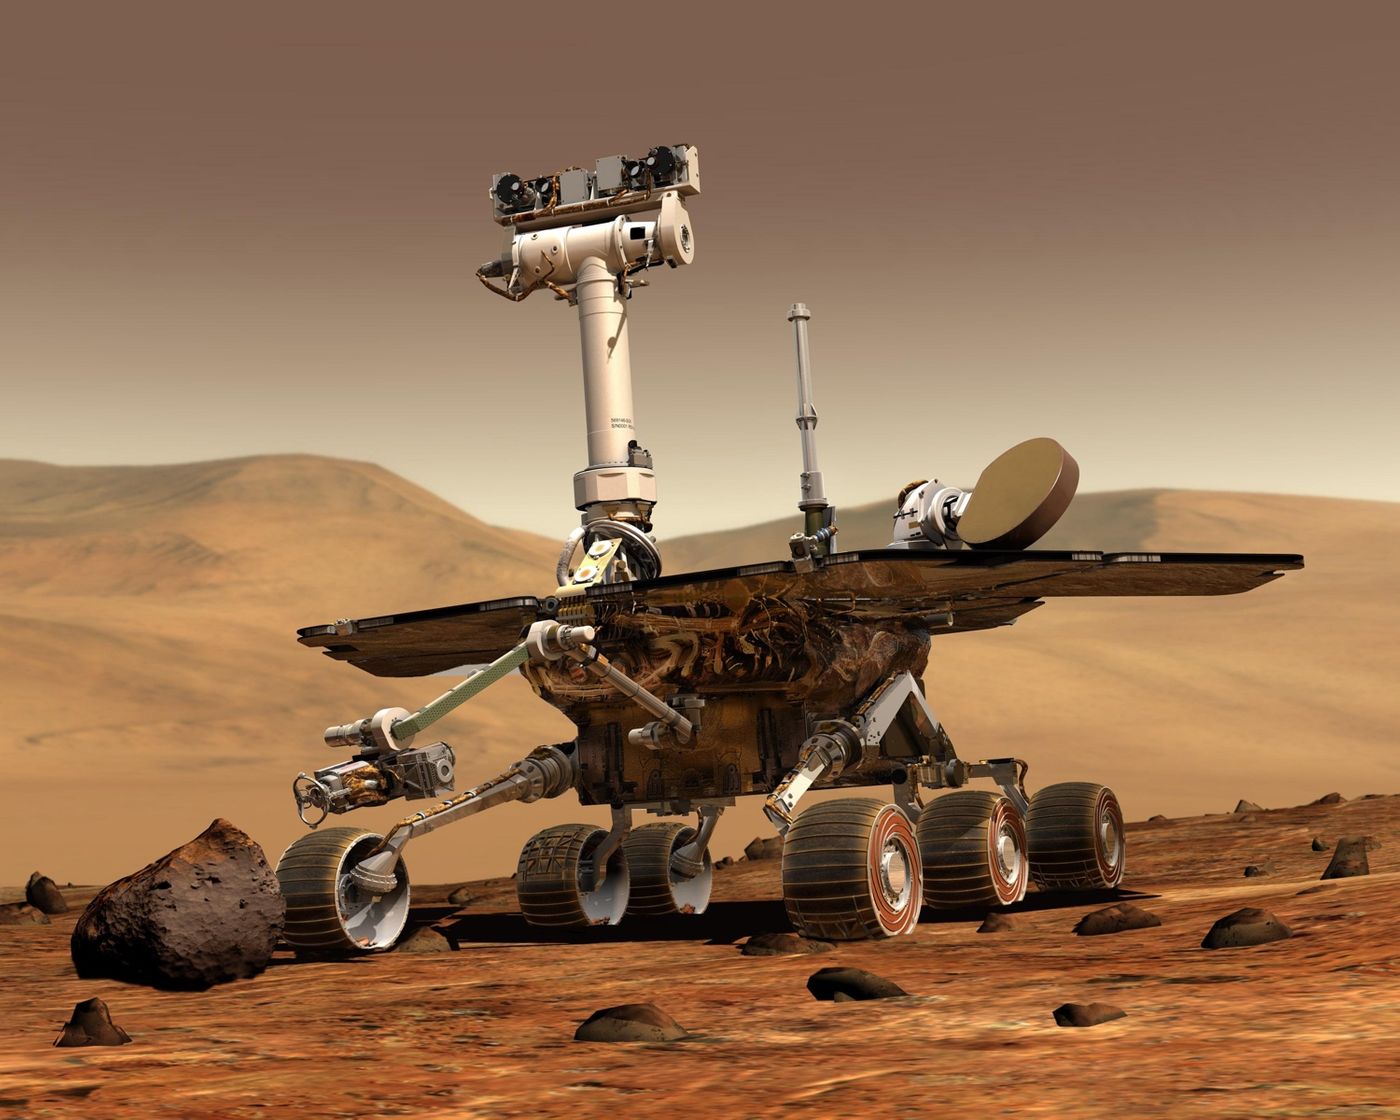 An artist's rendition of the Mars Opportunity rover.